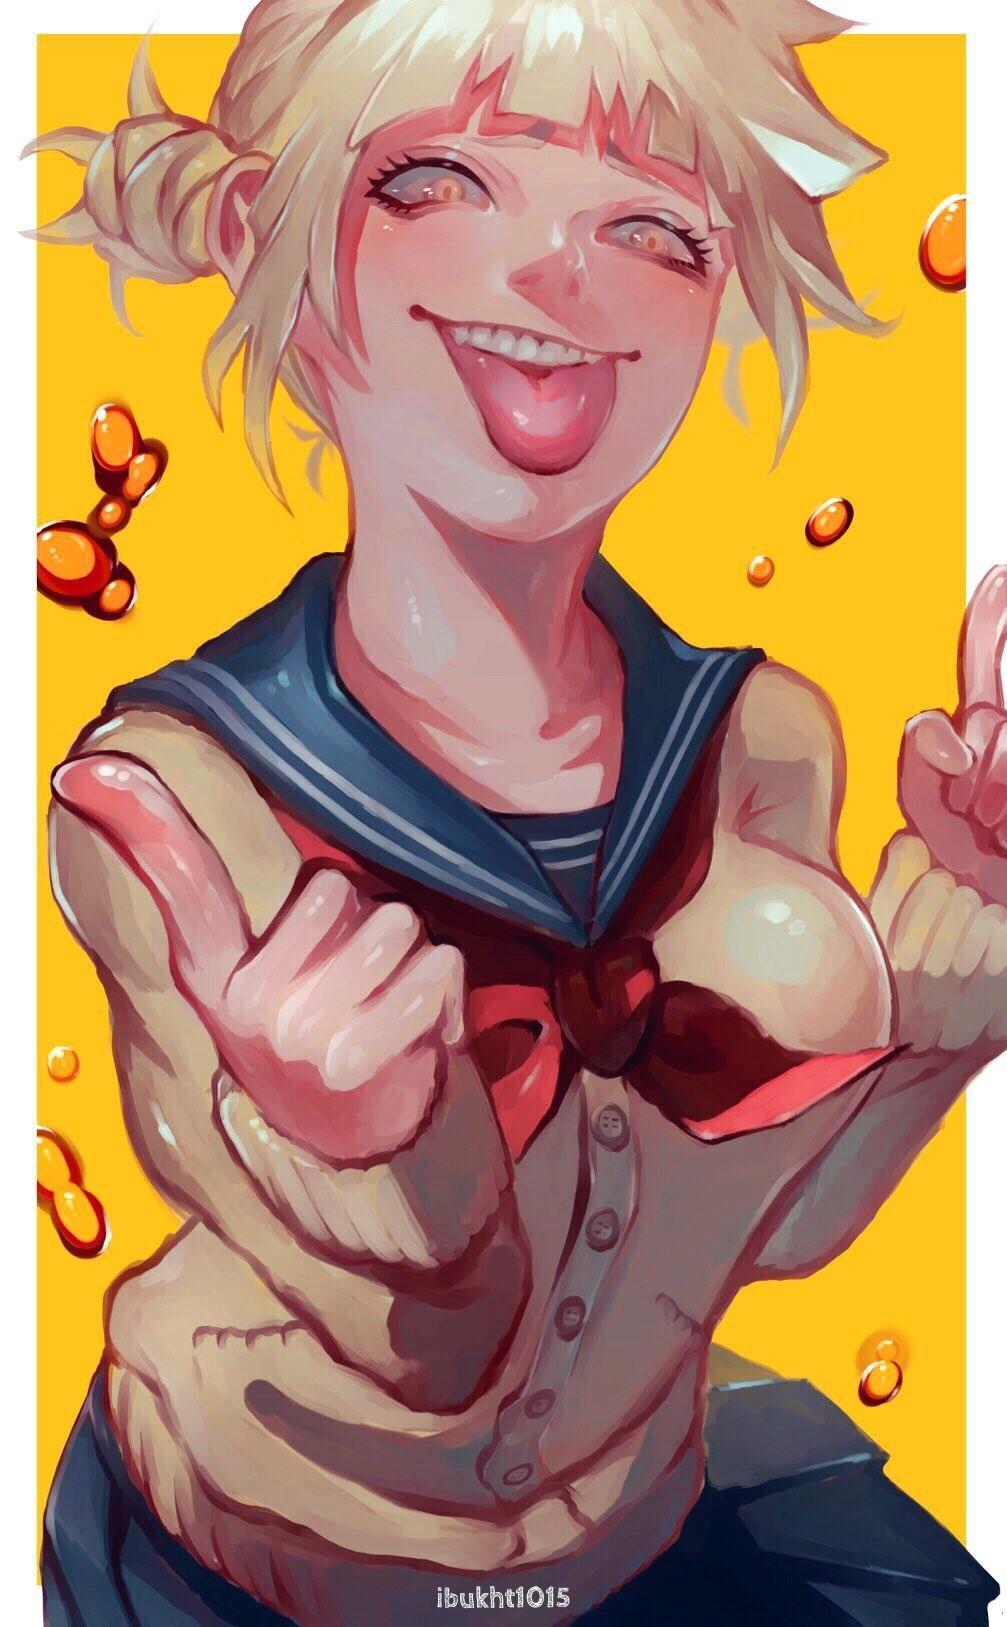 HD wallpaper, Tongue Out, Long Hair, 2D, Himiko Toga, Looking At Viewer, Simple Background, Yellow Eyes, Blond Hair, School Uniform, Boku No Hero Academia, Yandere, Fan Art, Digital Art, Vertical, Doodle, Anime Girls